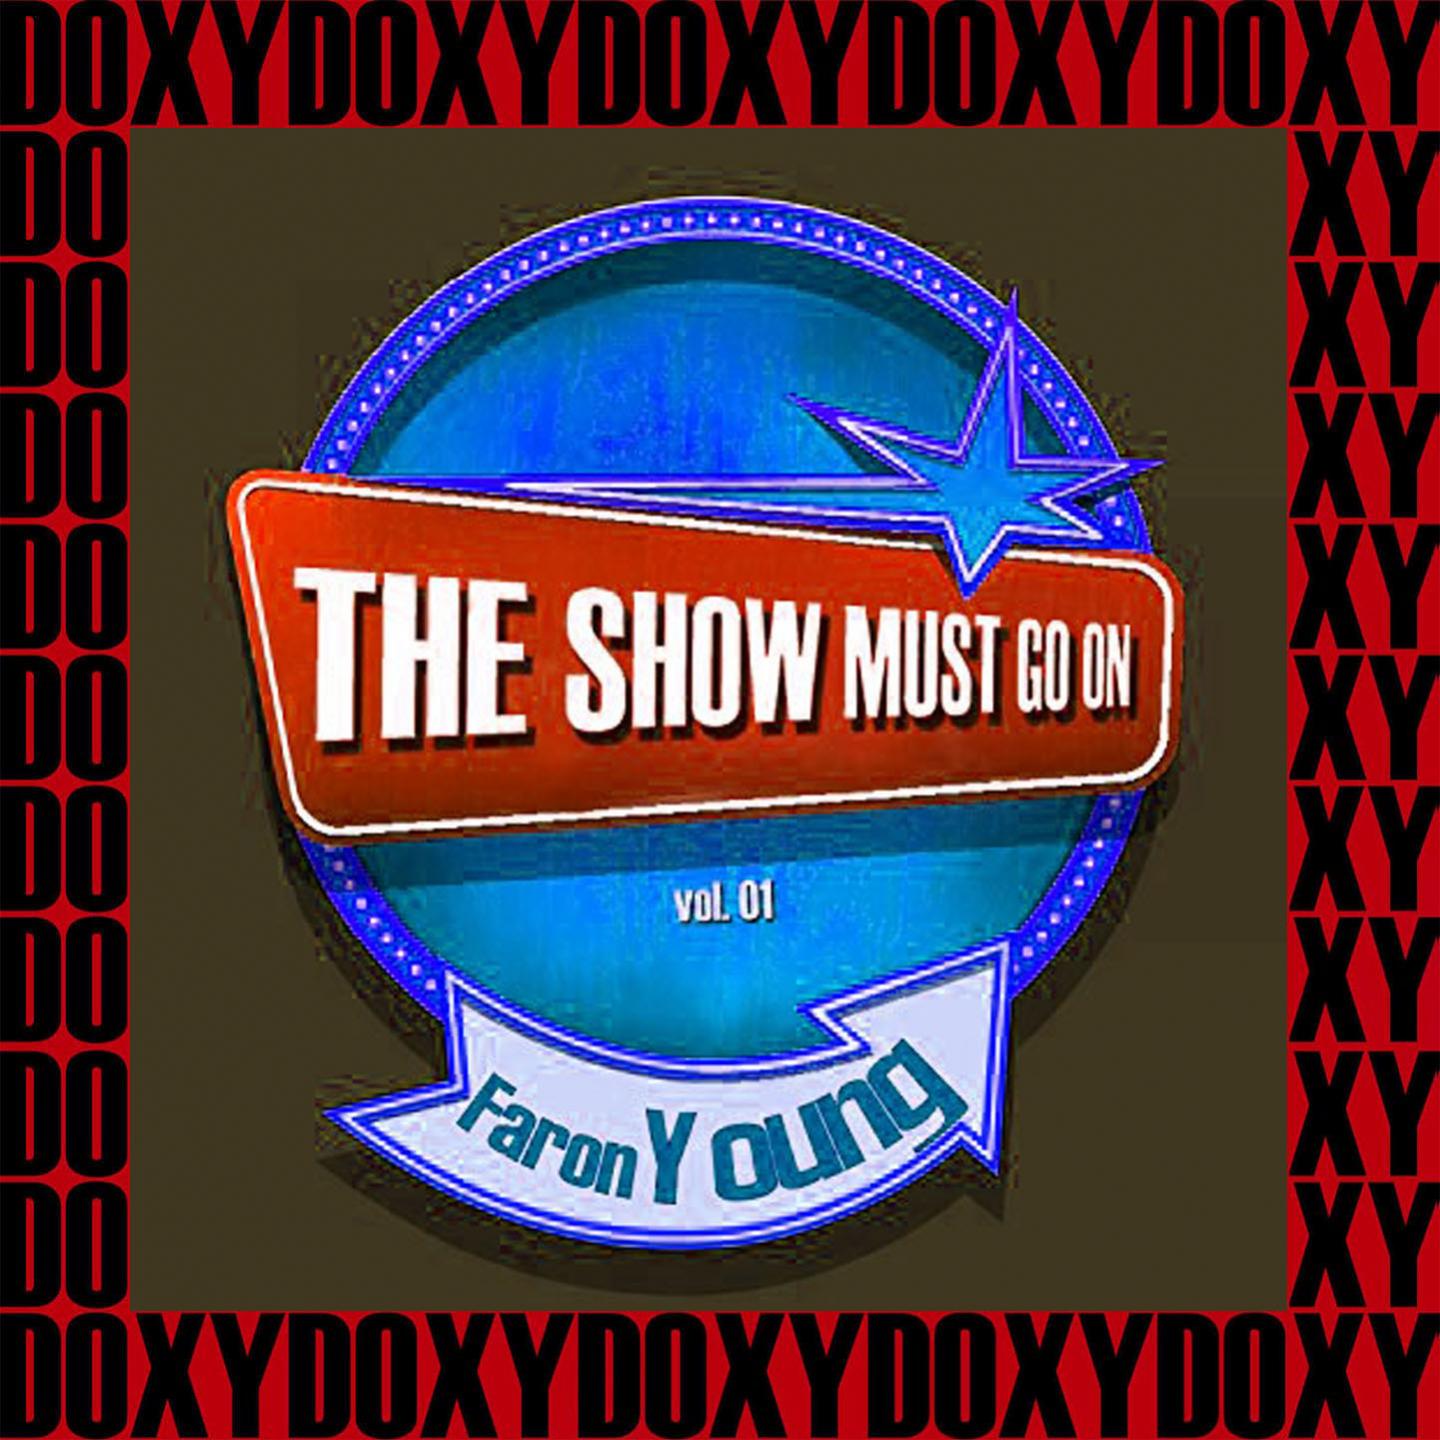 The Show Must Go On Vol. 1 (Remastered Version) (Doxy Collection)